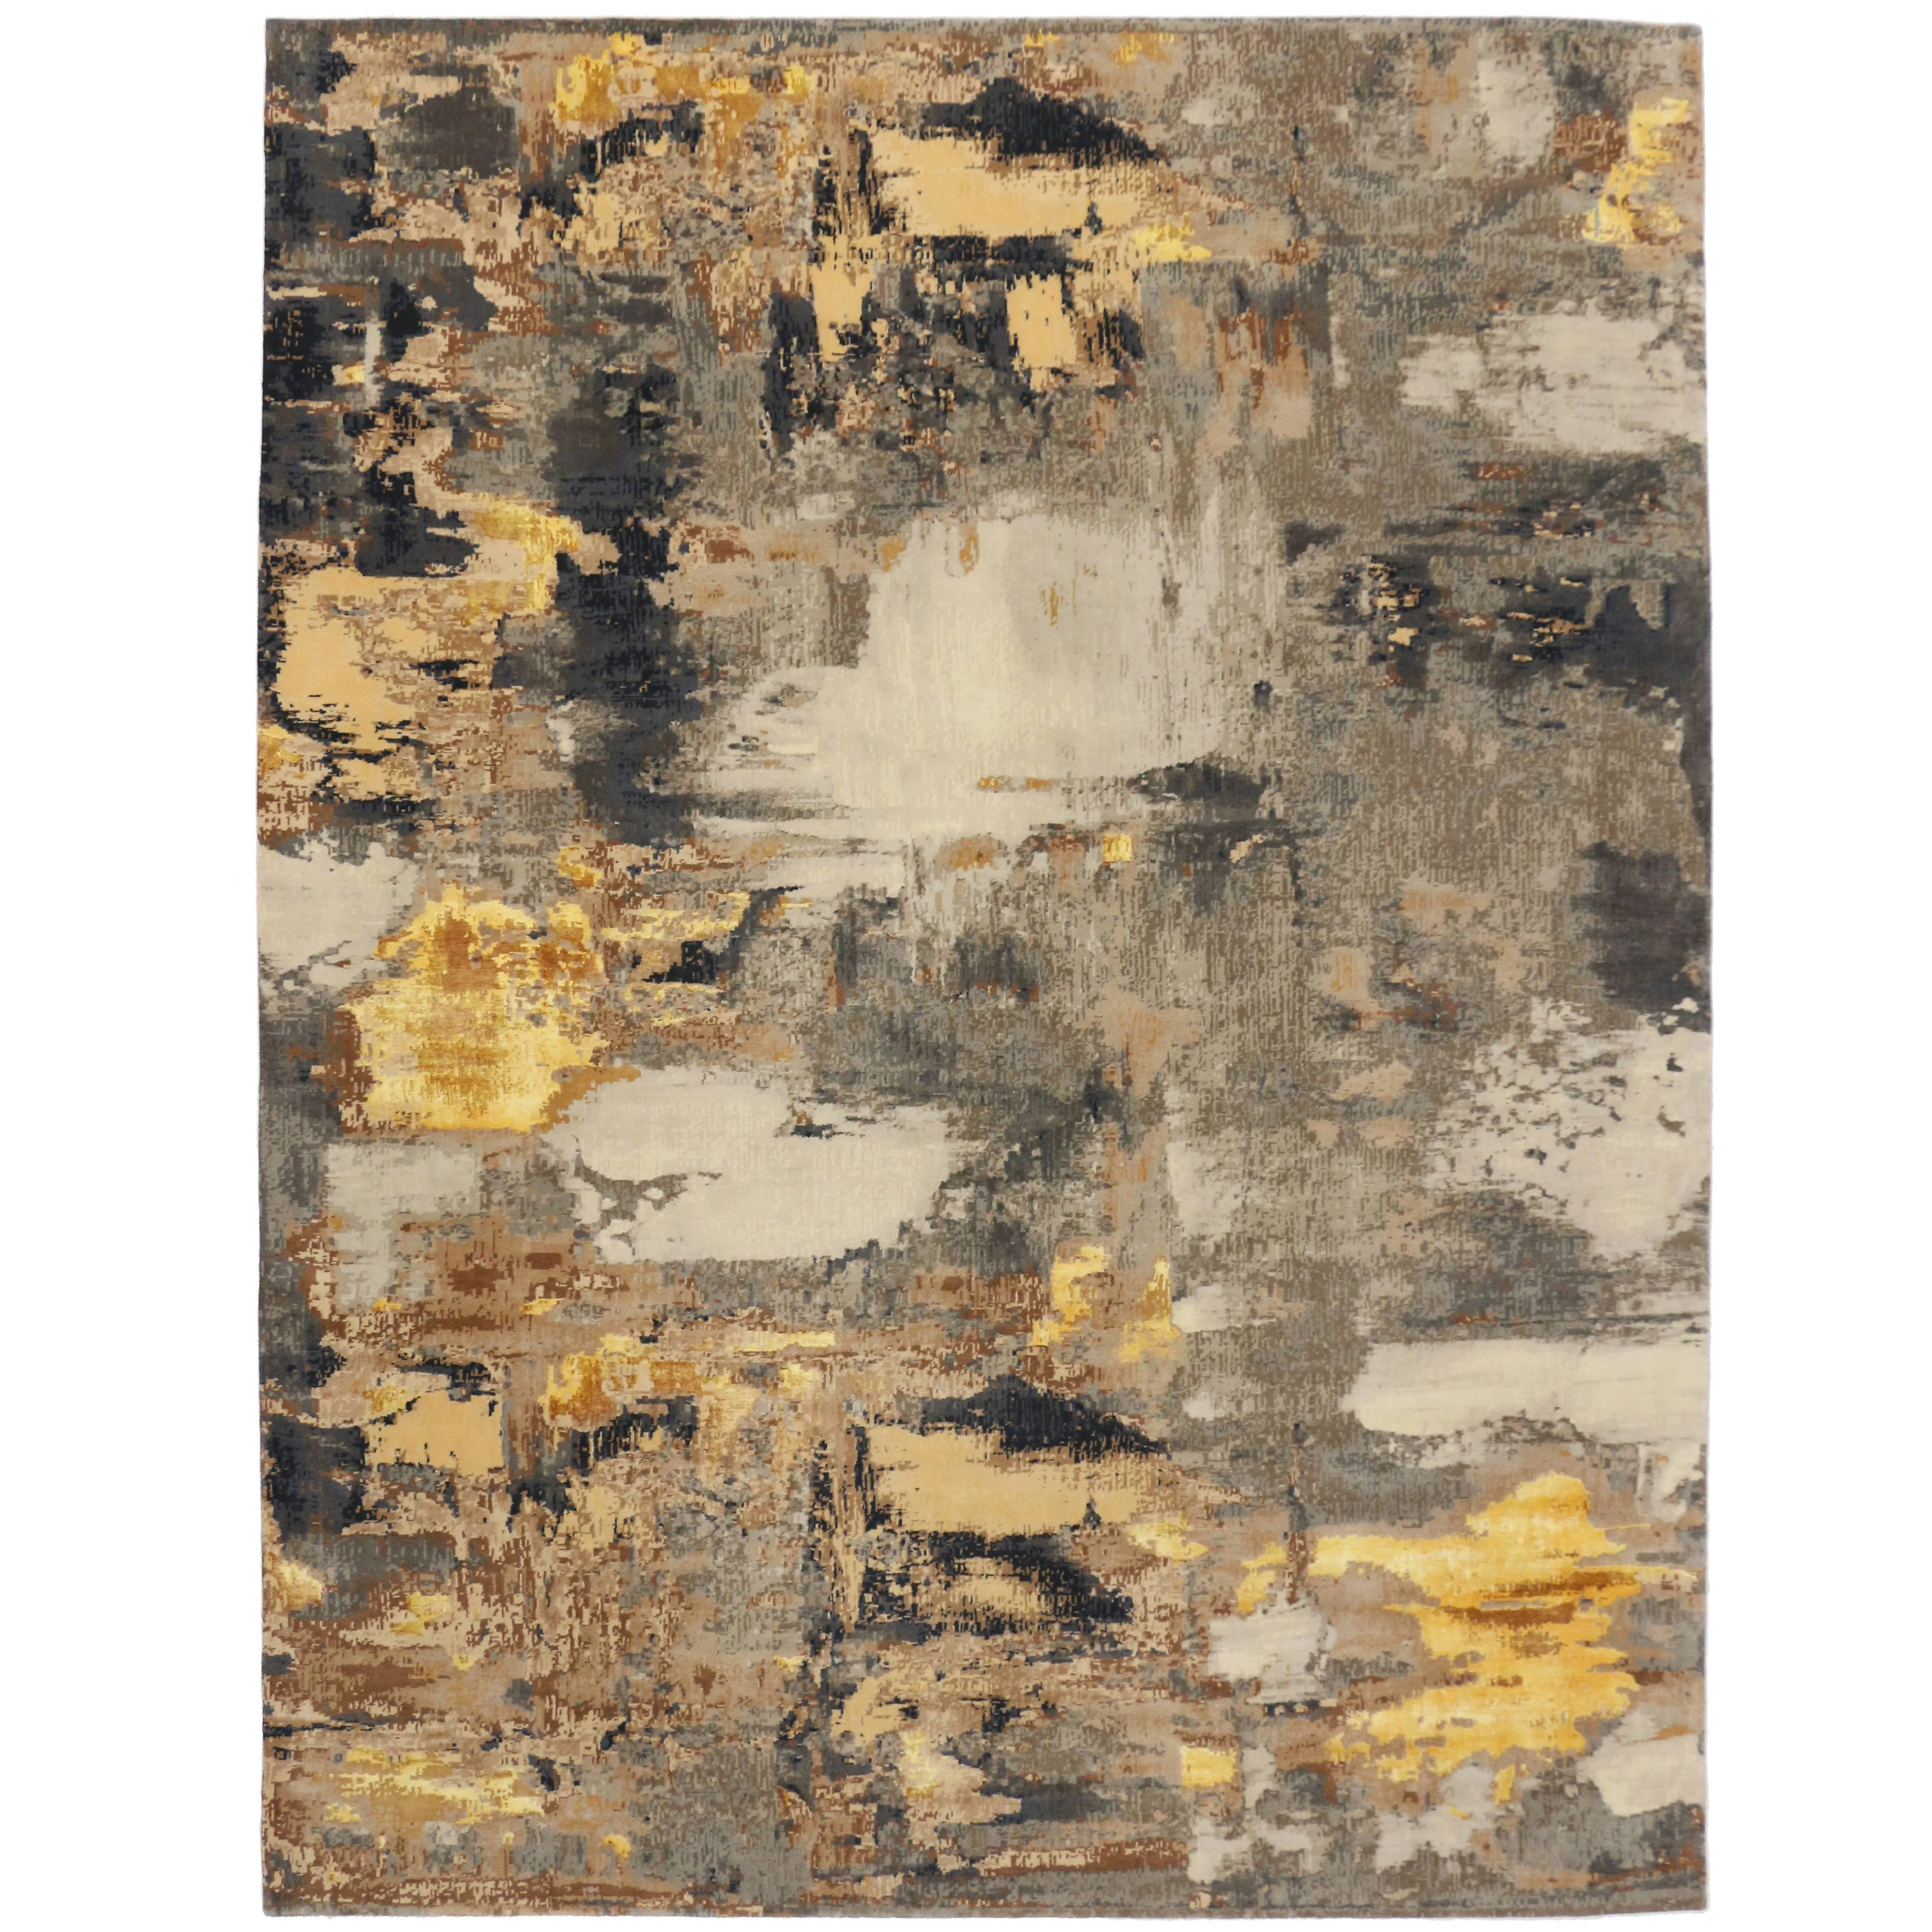 New Contemporary Area Rug with Abstract Expressionist Grunge Art Style